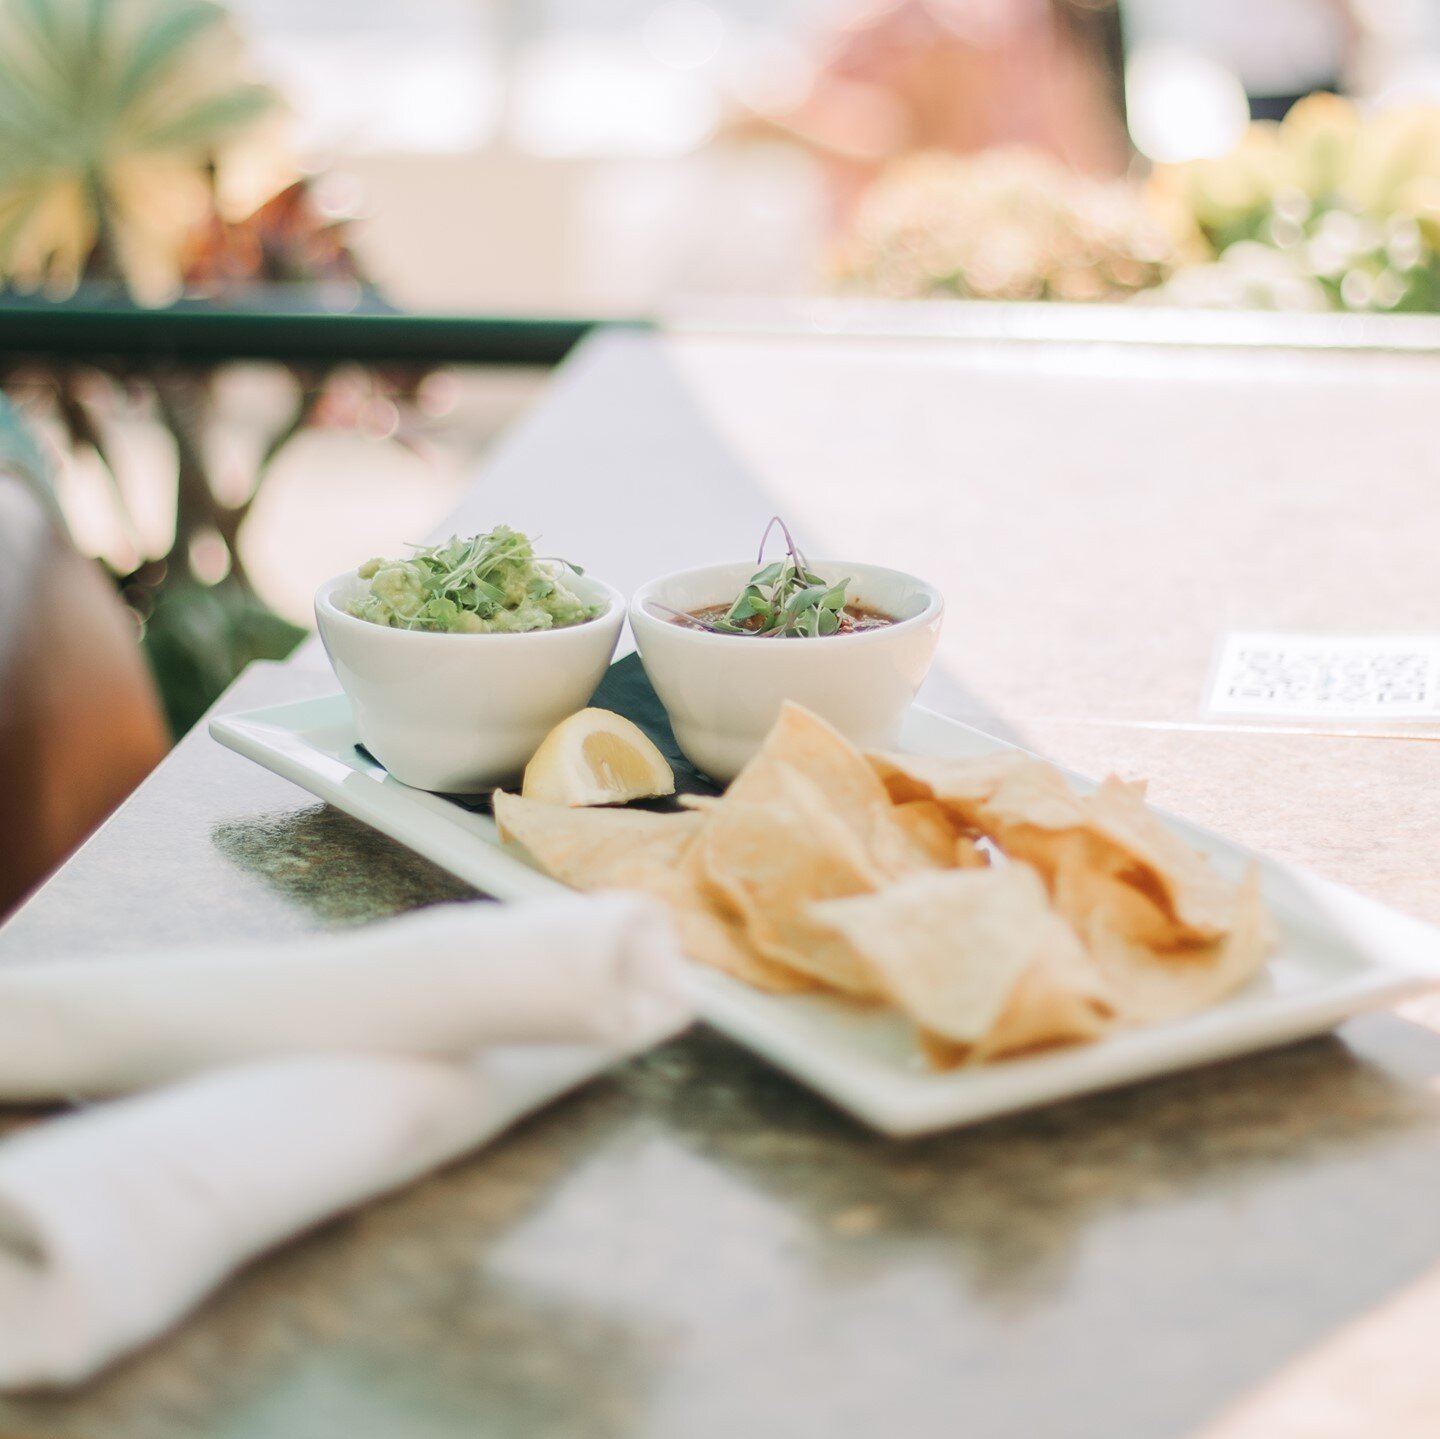 You know the meal is going to be top notch when it starts with our house-made guac + salsa. 🥑